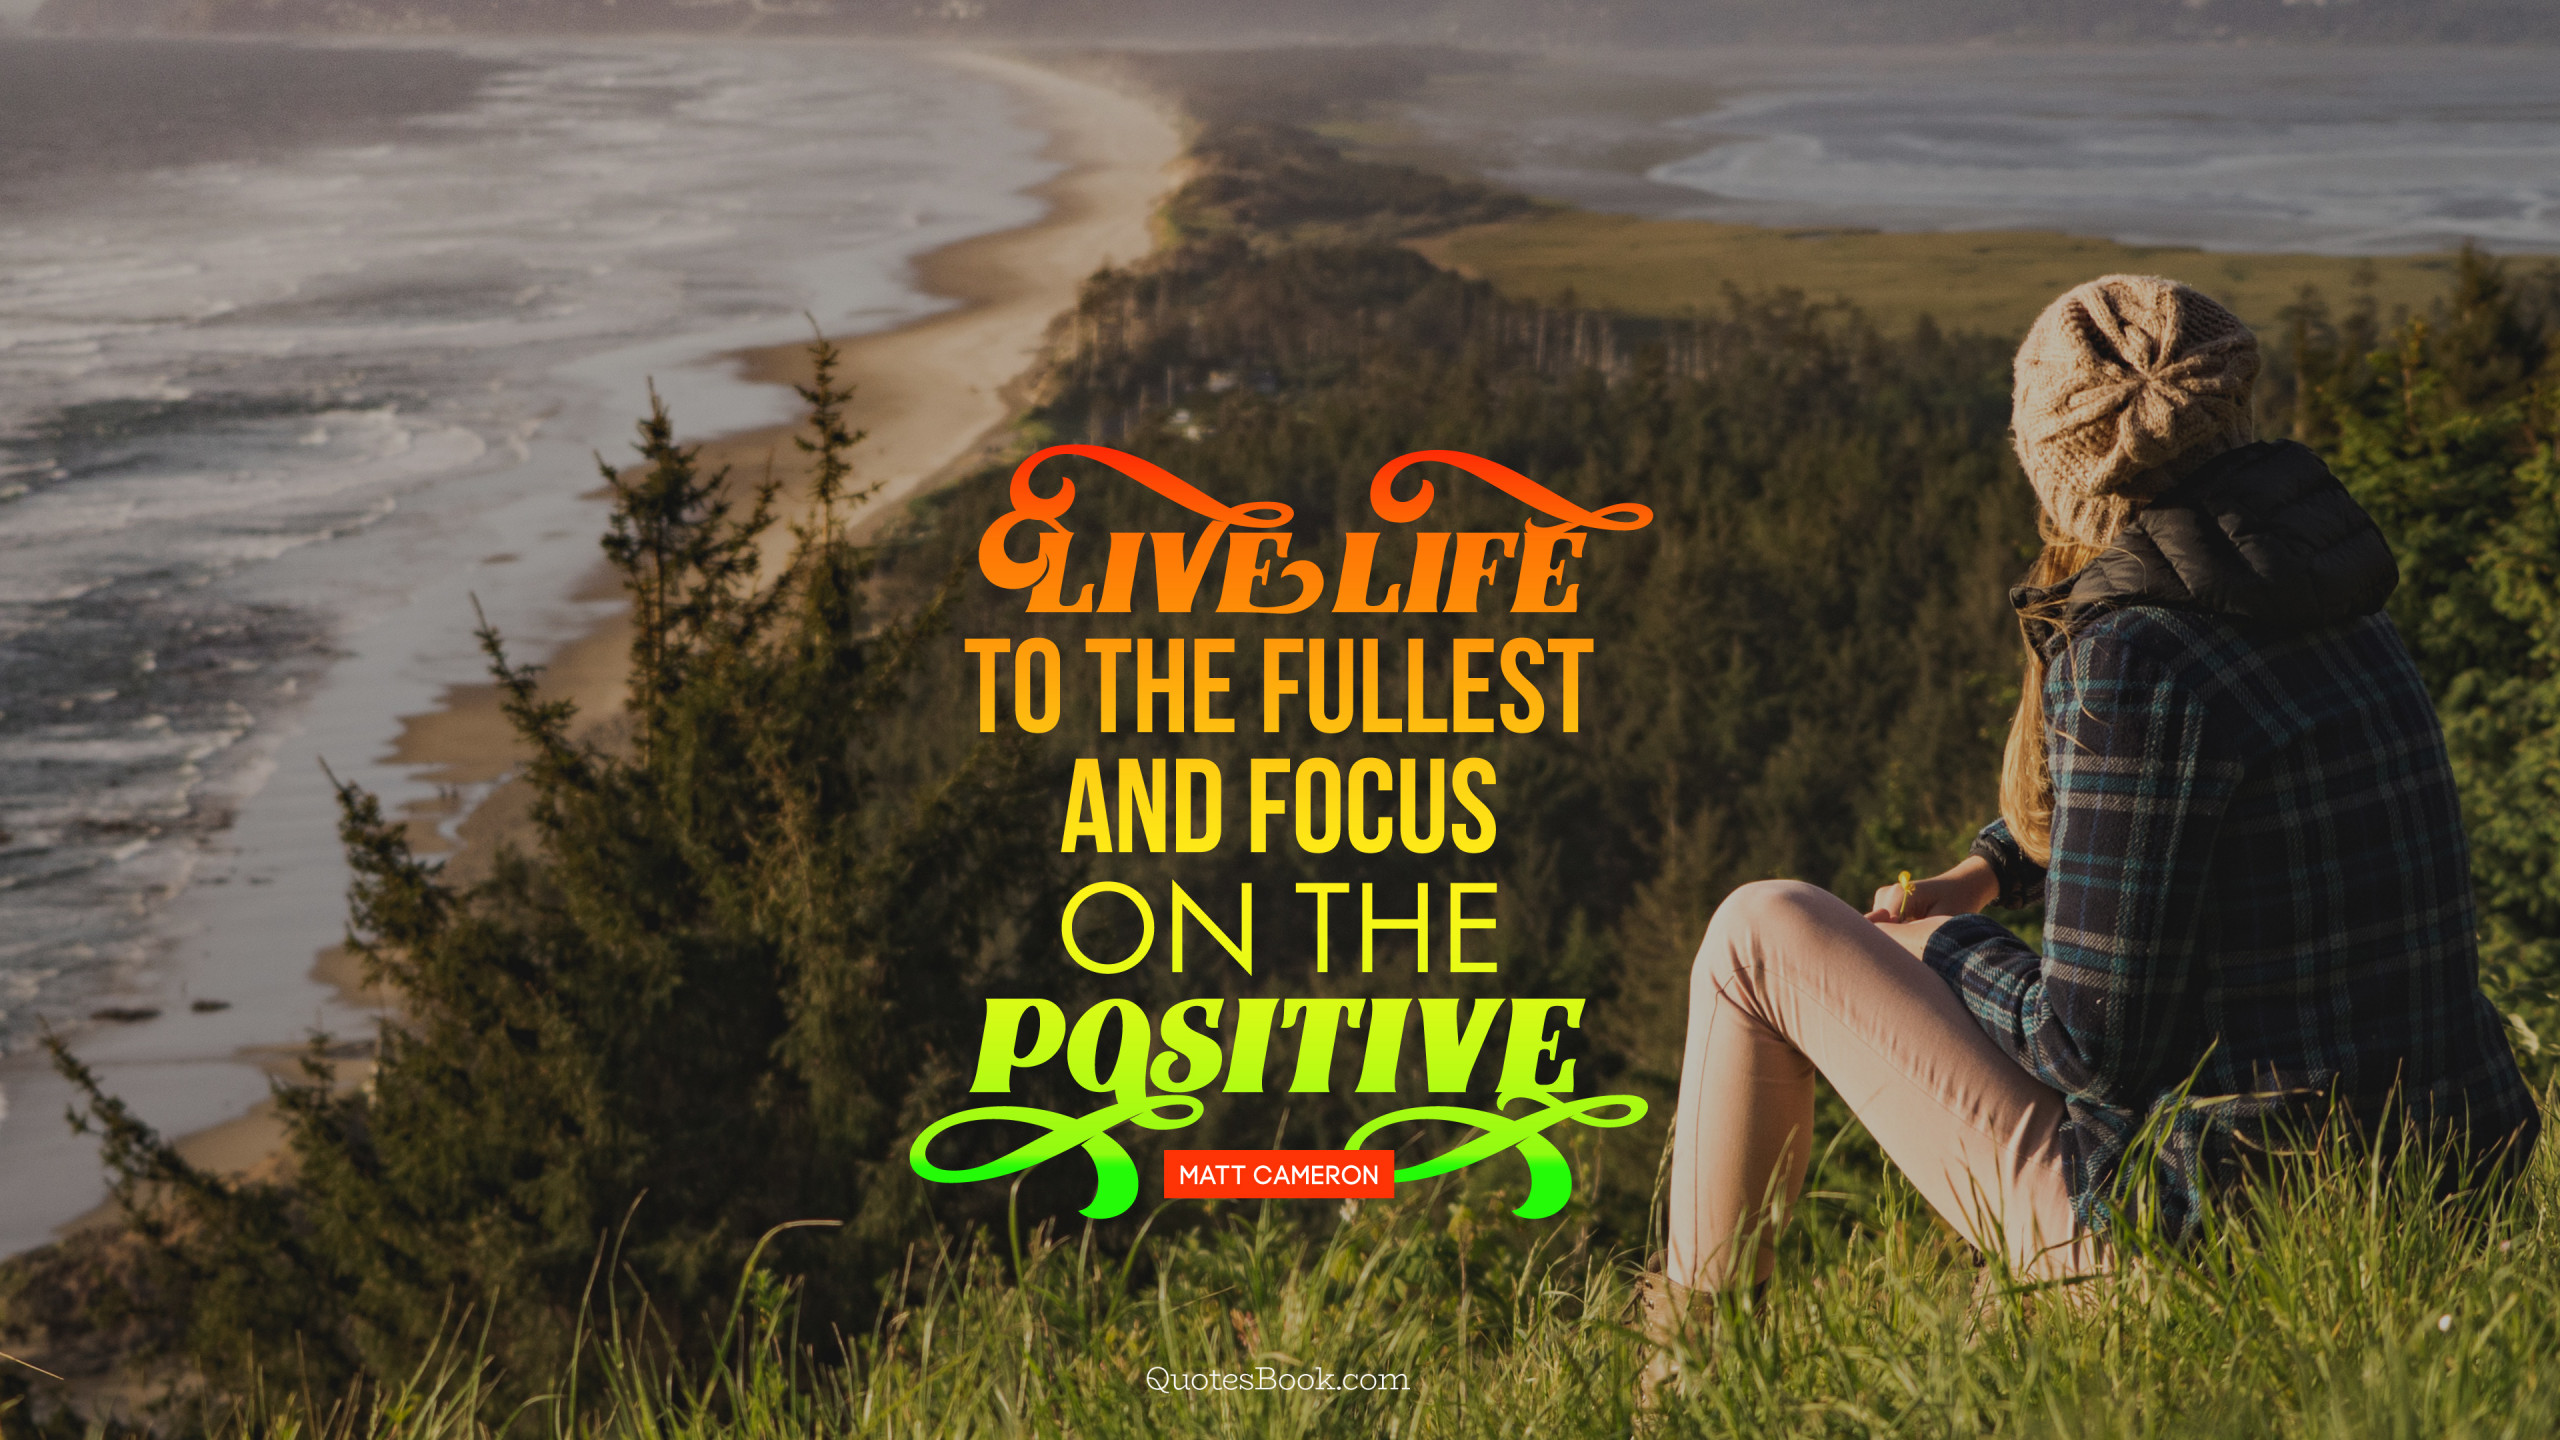  Live  life  to the fullest and focus on the positive 